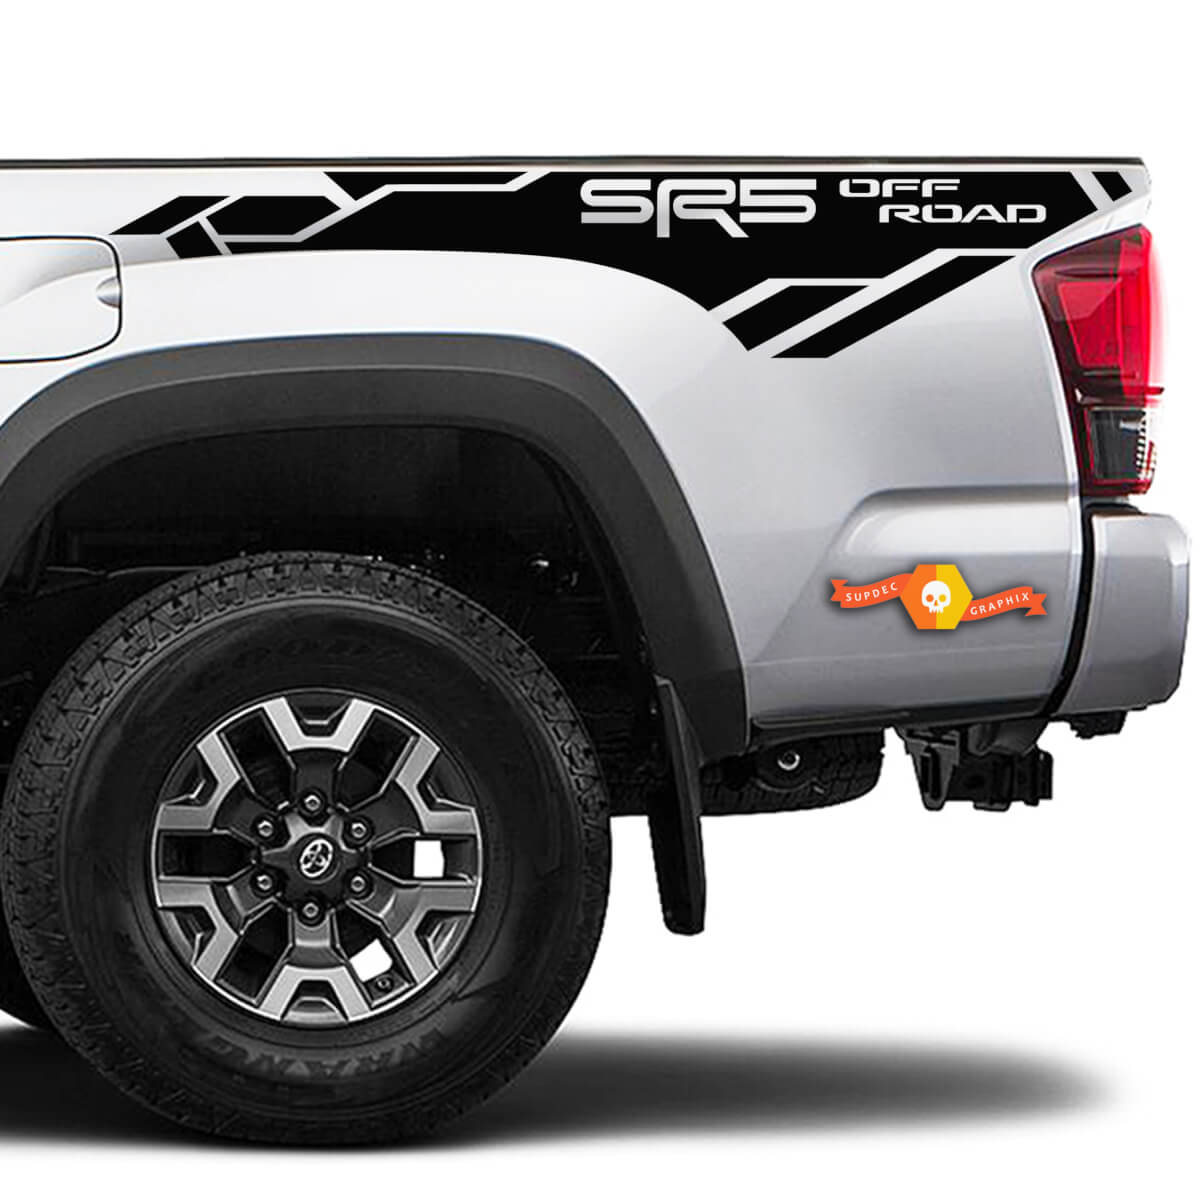 2 Toyota Tacoma 2016-2022+ SR5 OF-ROAD Bed Side Bed Stripes Vinyl Stickers Decal for Toyota Tacoma